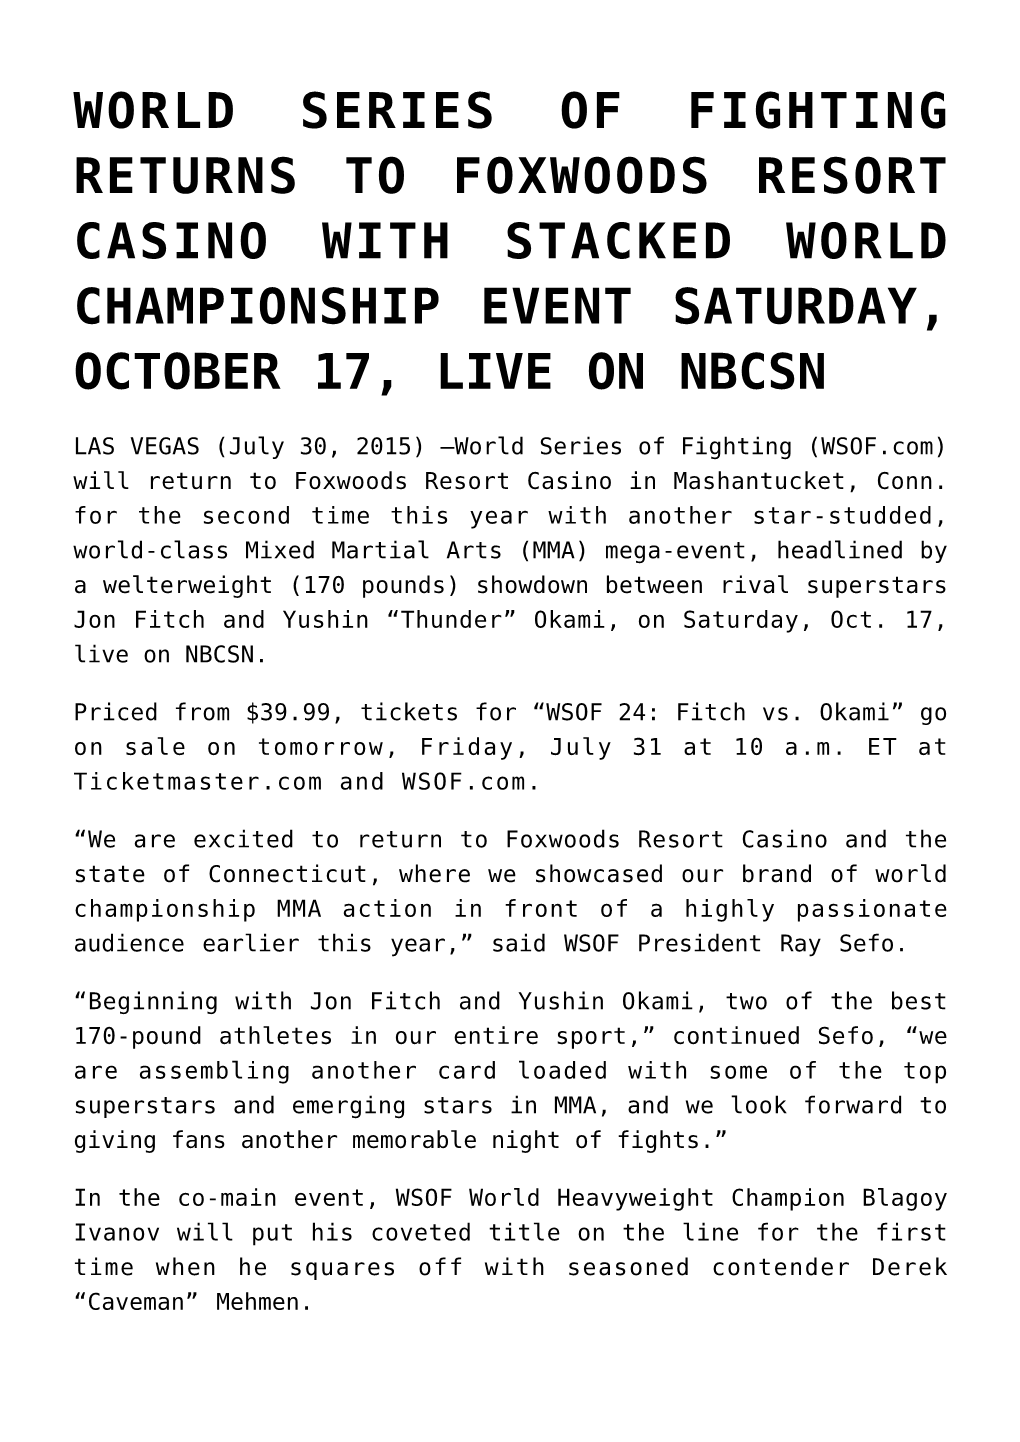 World Series of Fighting Returns to Foxwoods Resort Casino with Stacked World Championship Event Saturday, October 17, Live on Nbcsn